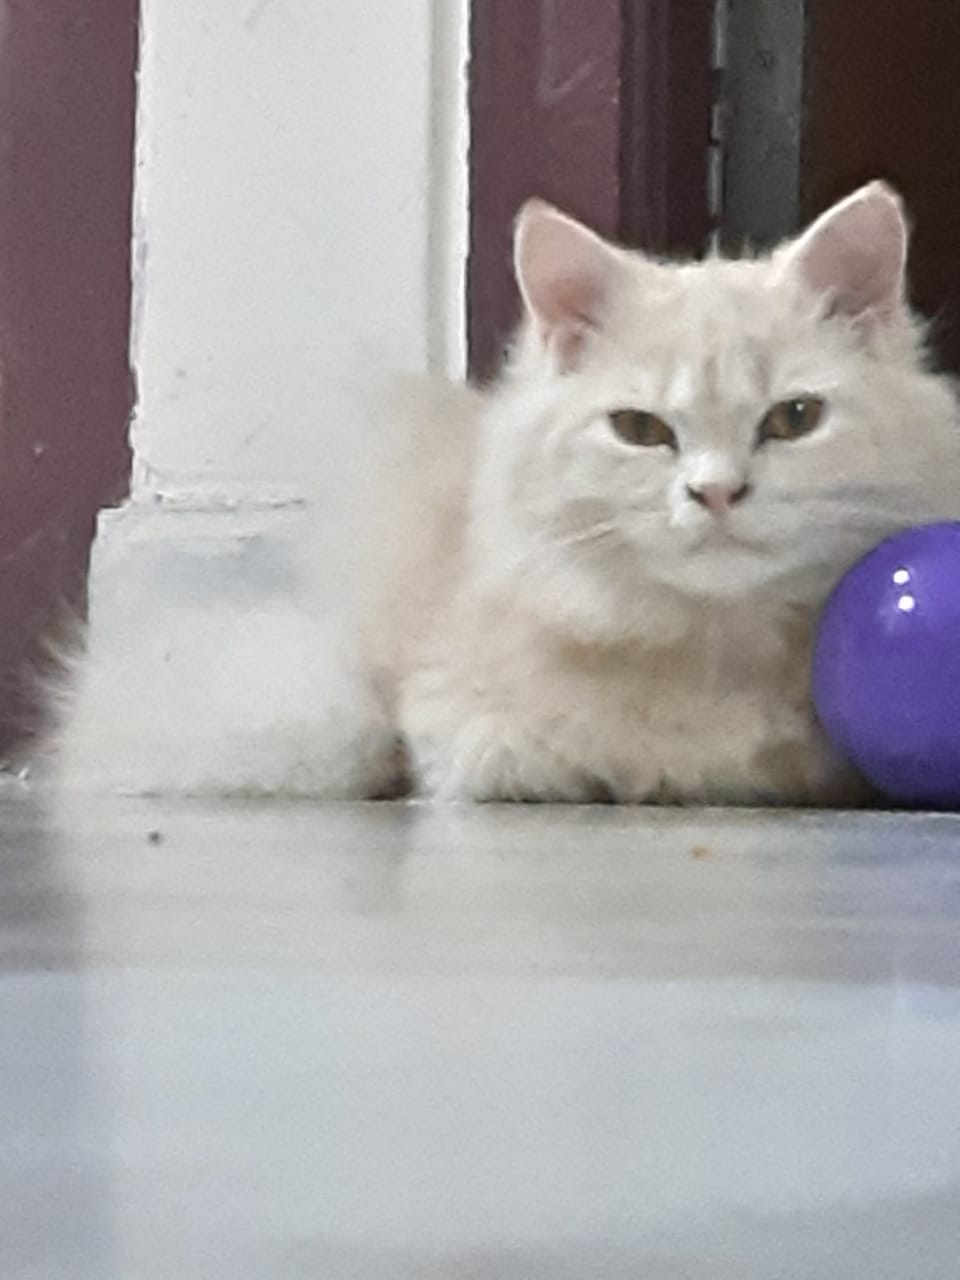 Persian Cat - Female, 2 Years Old, Light Brown in colour, Fluffy Hair